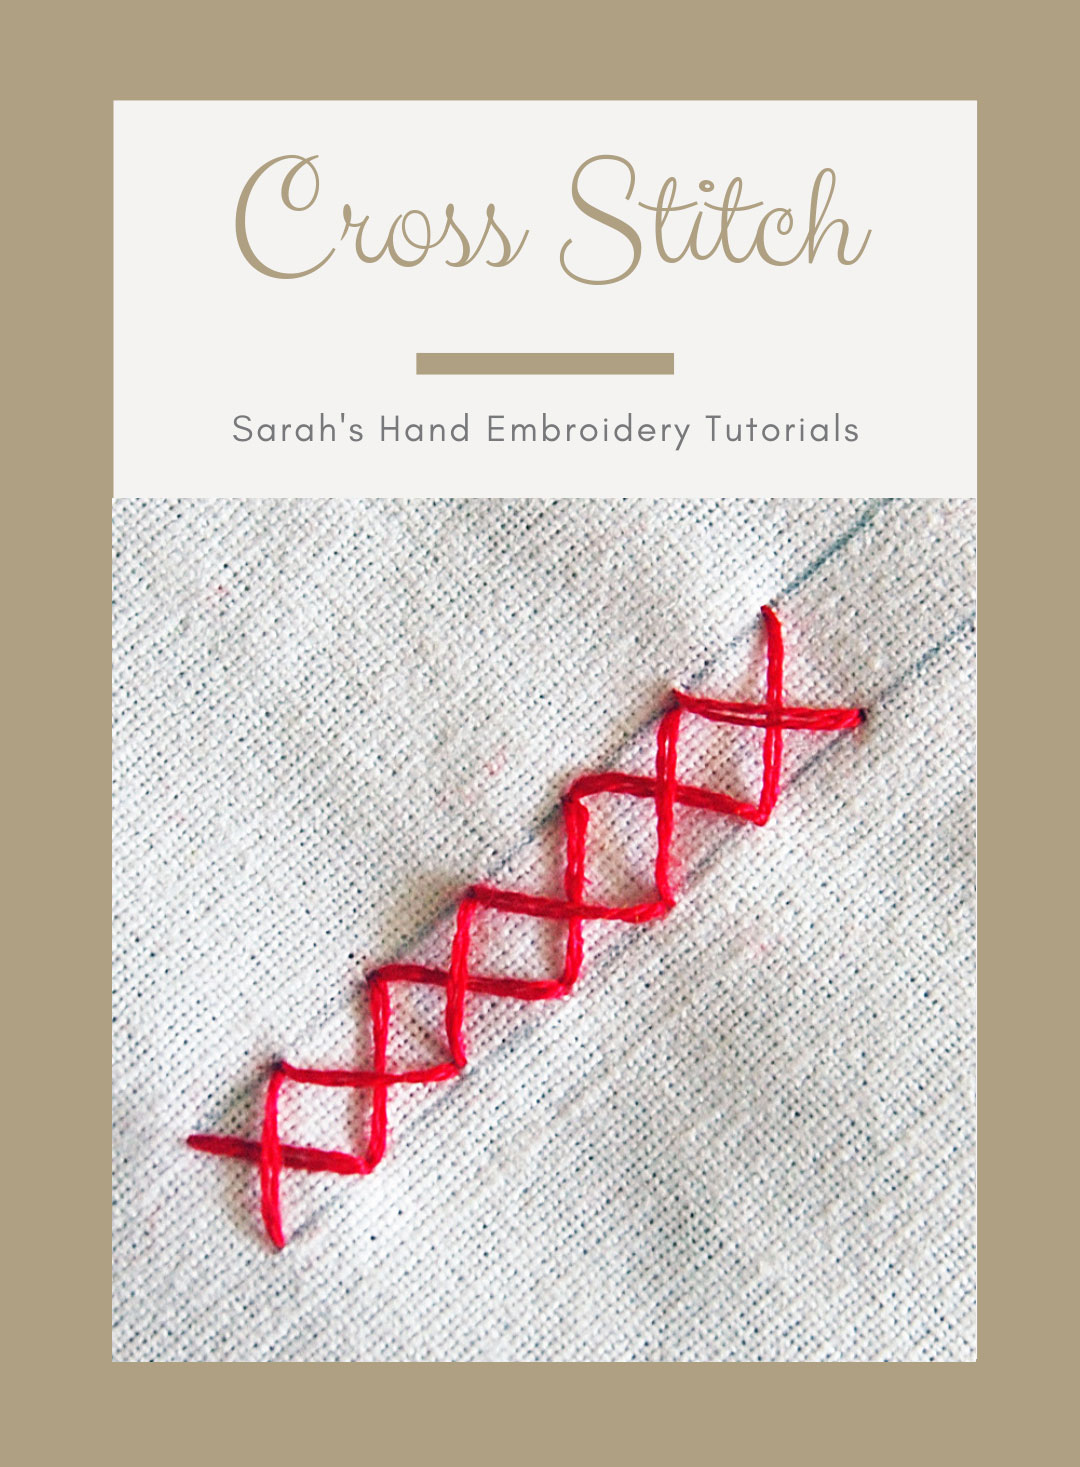 How to do the Cross Stitch - Sarah's Hand Embroidery Tutorials